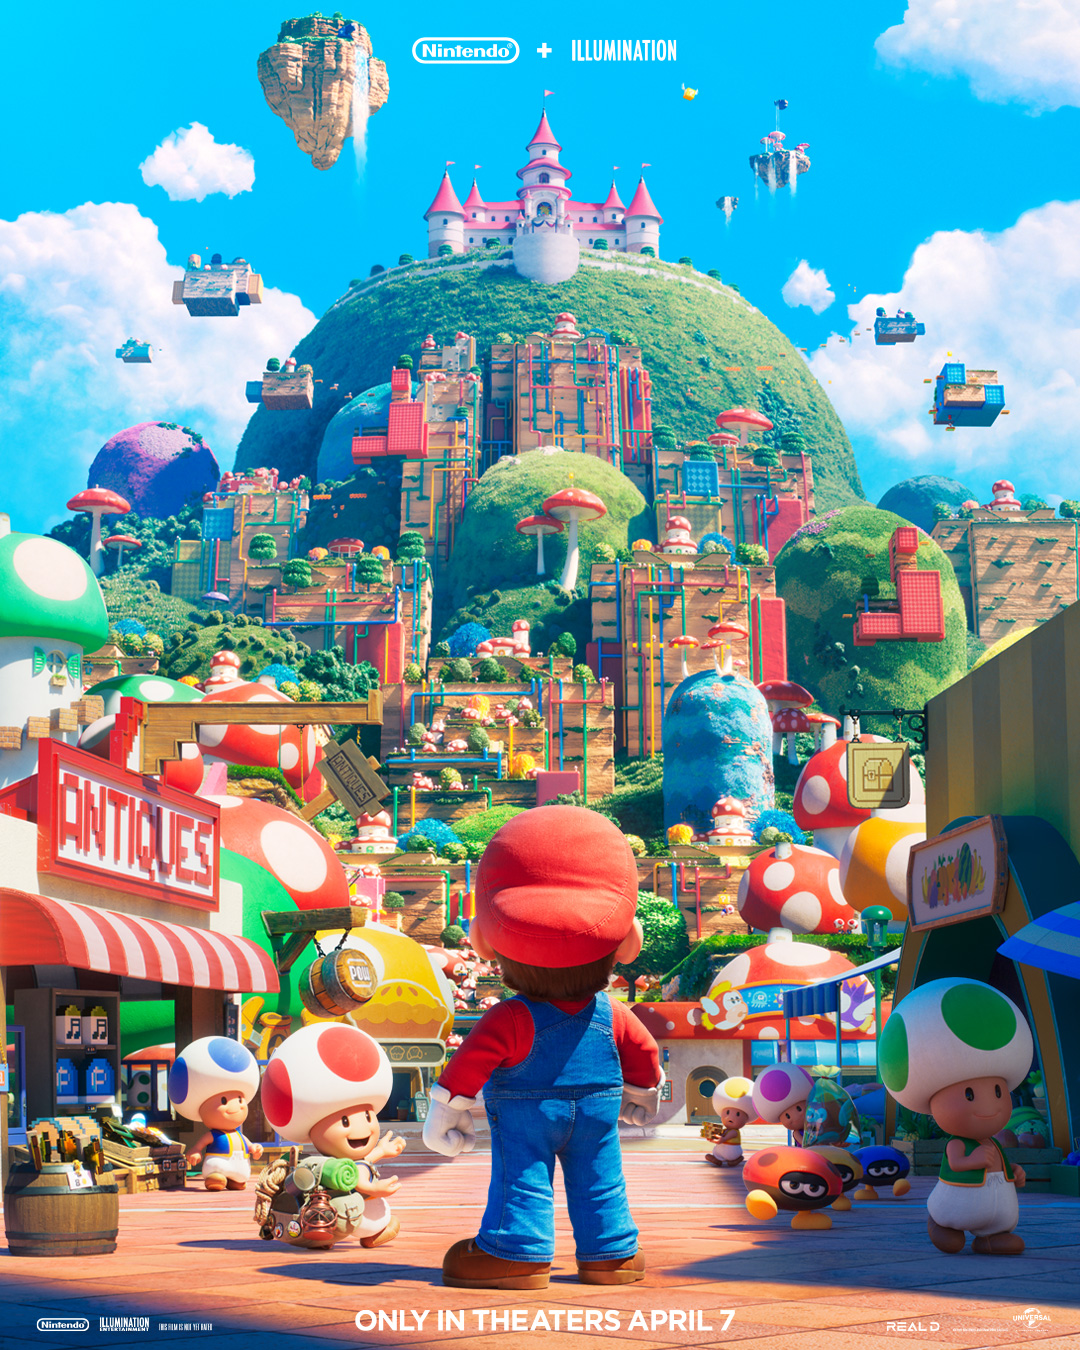 VIDEO Watch the Trailer for the NEW Super Mario Bros. Movie Featuring